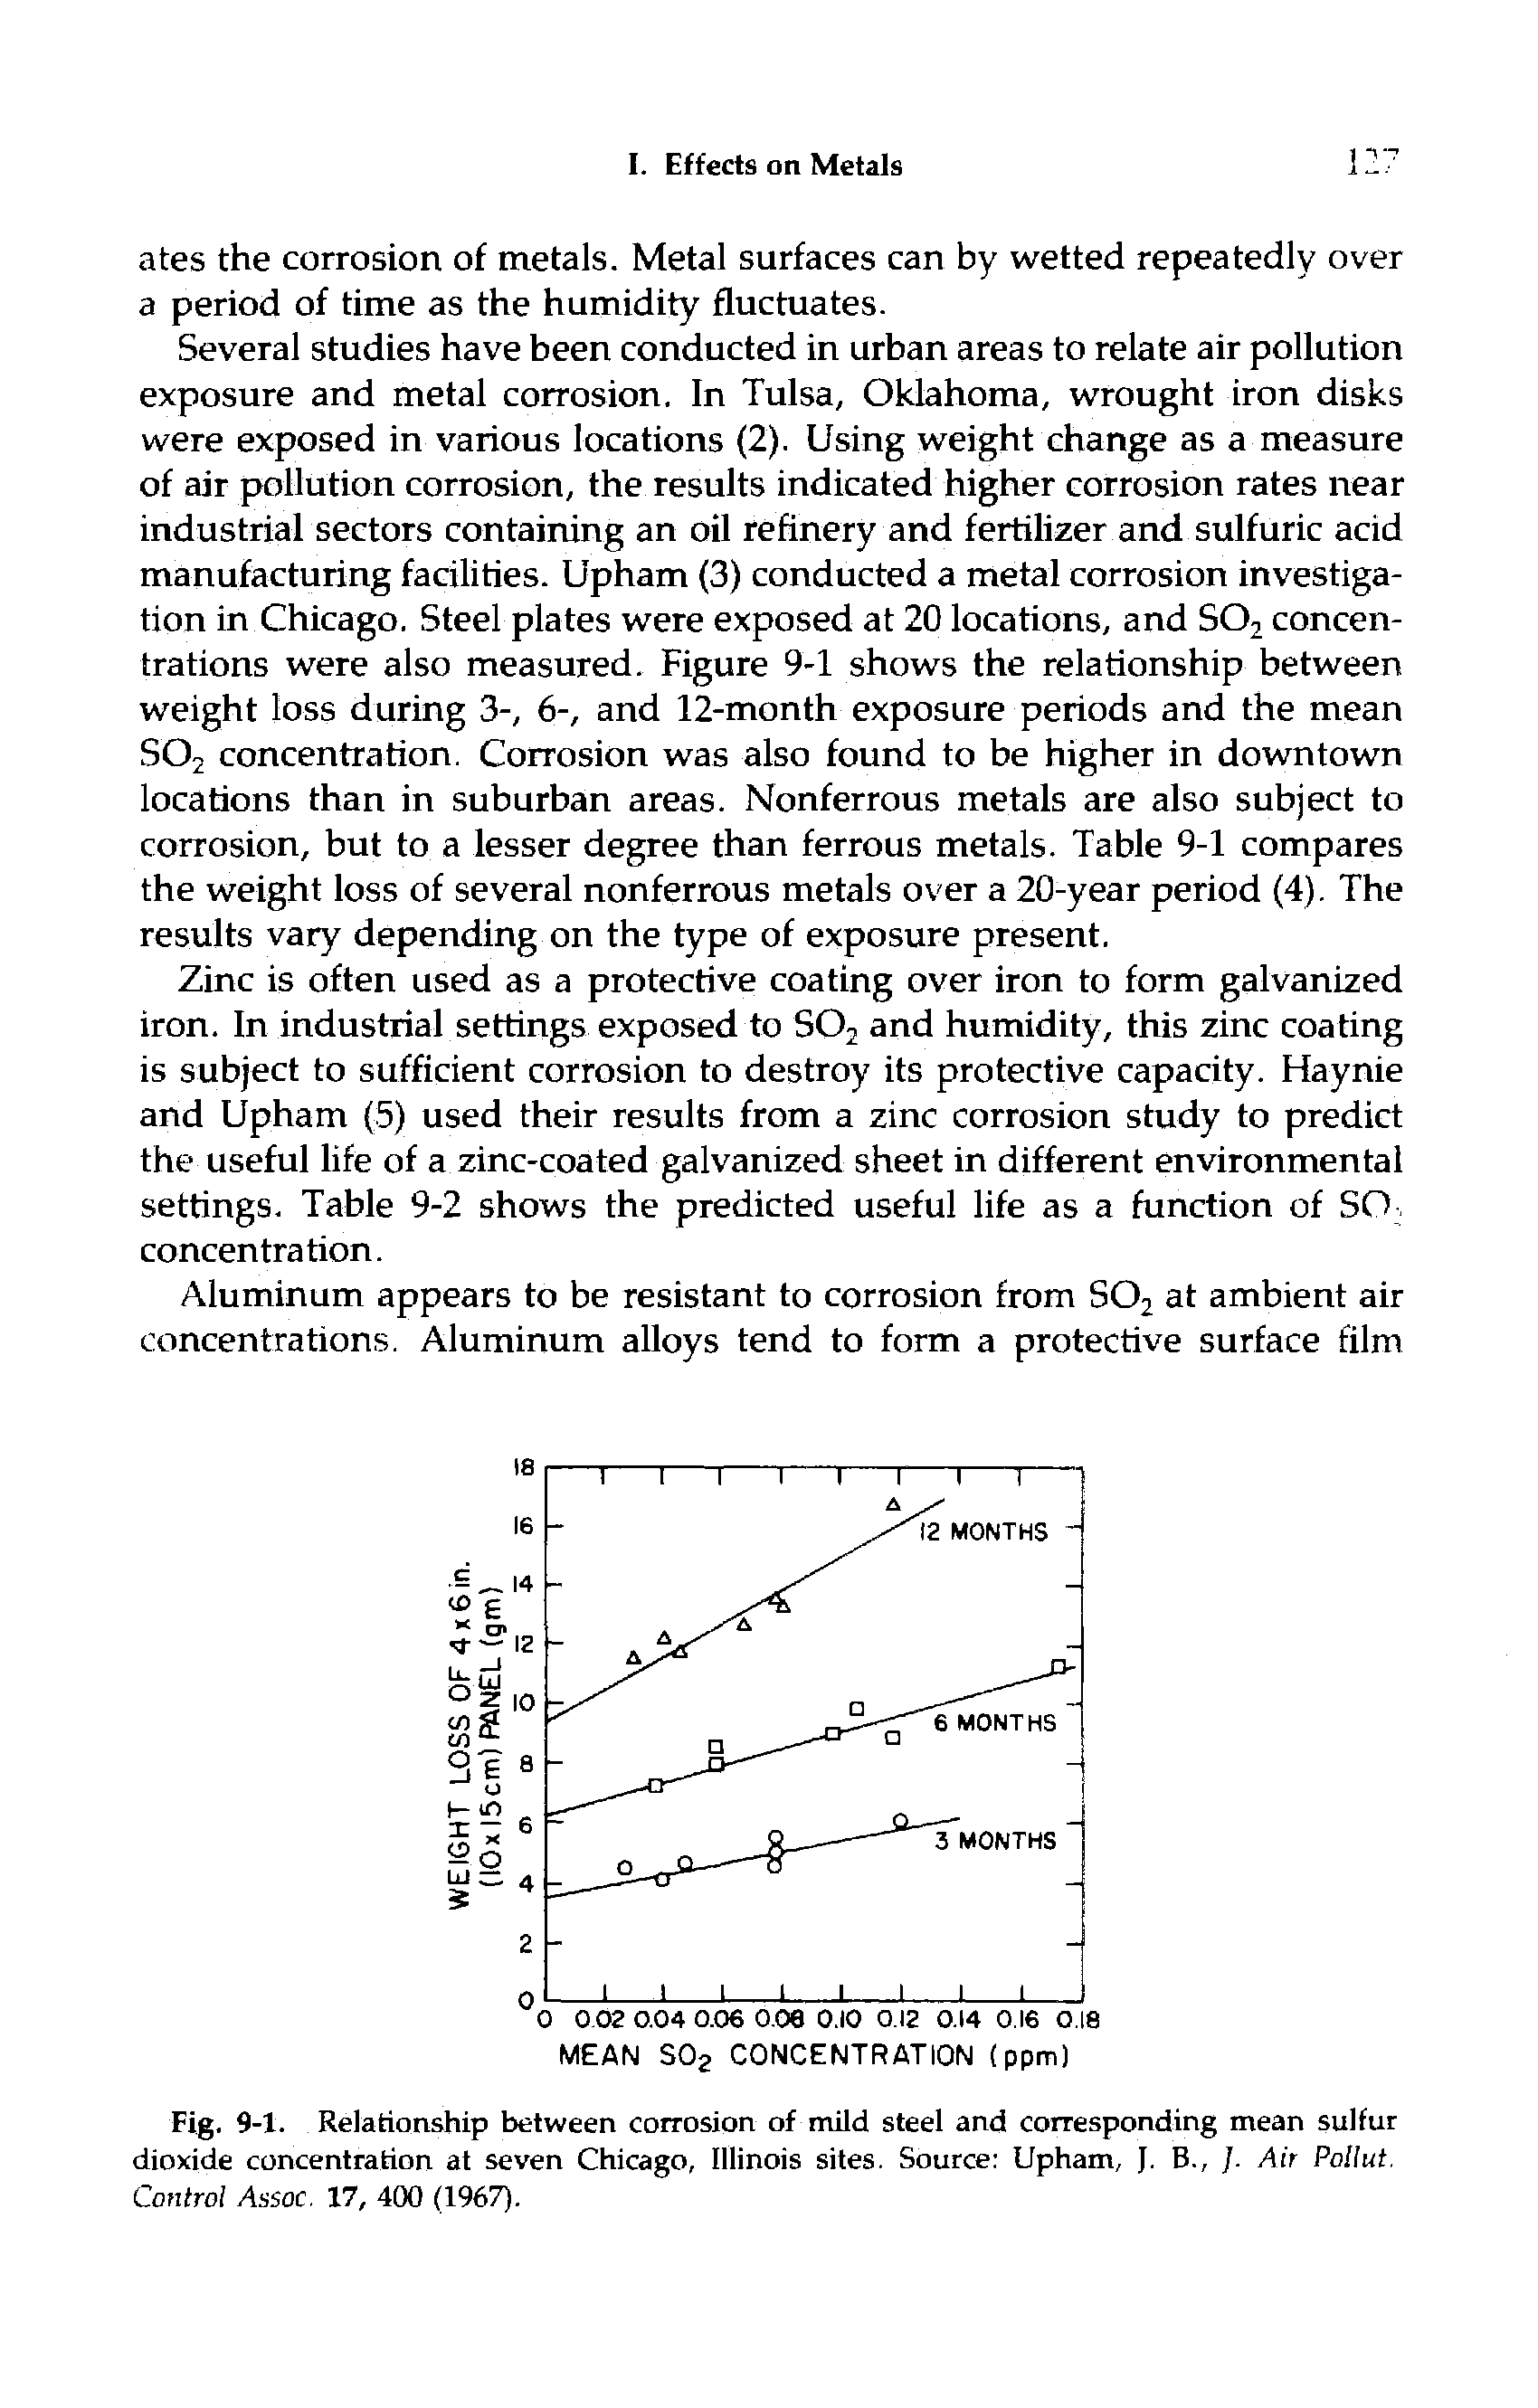 Fig. 9-1. Relationship between corrosion of mild steel and corresponding mean sulfur dioxide concentration at seven Chicago, Illinois sites. Source Upham, J. B., /. Air PoUut, Control Assoc. 17, 4(X) (1967).